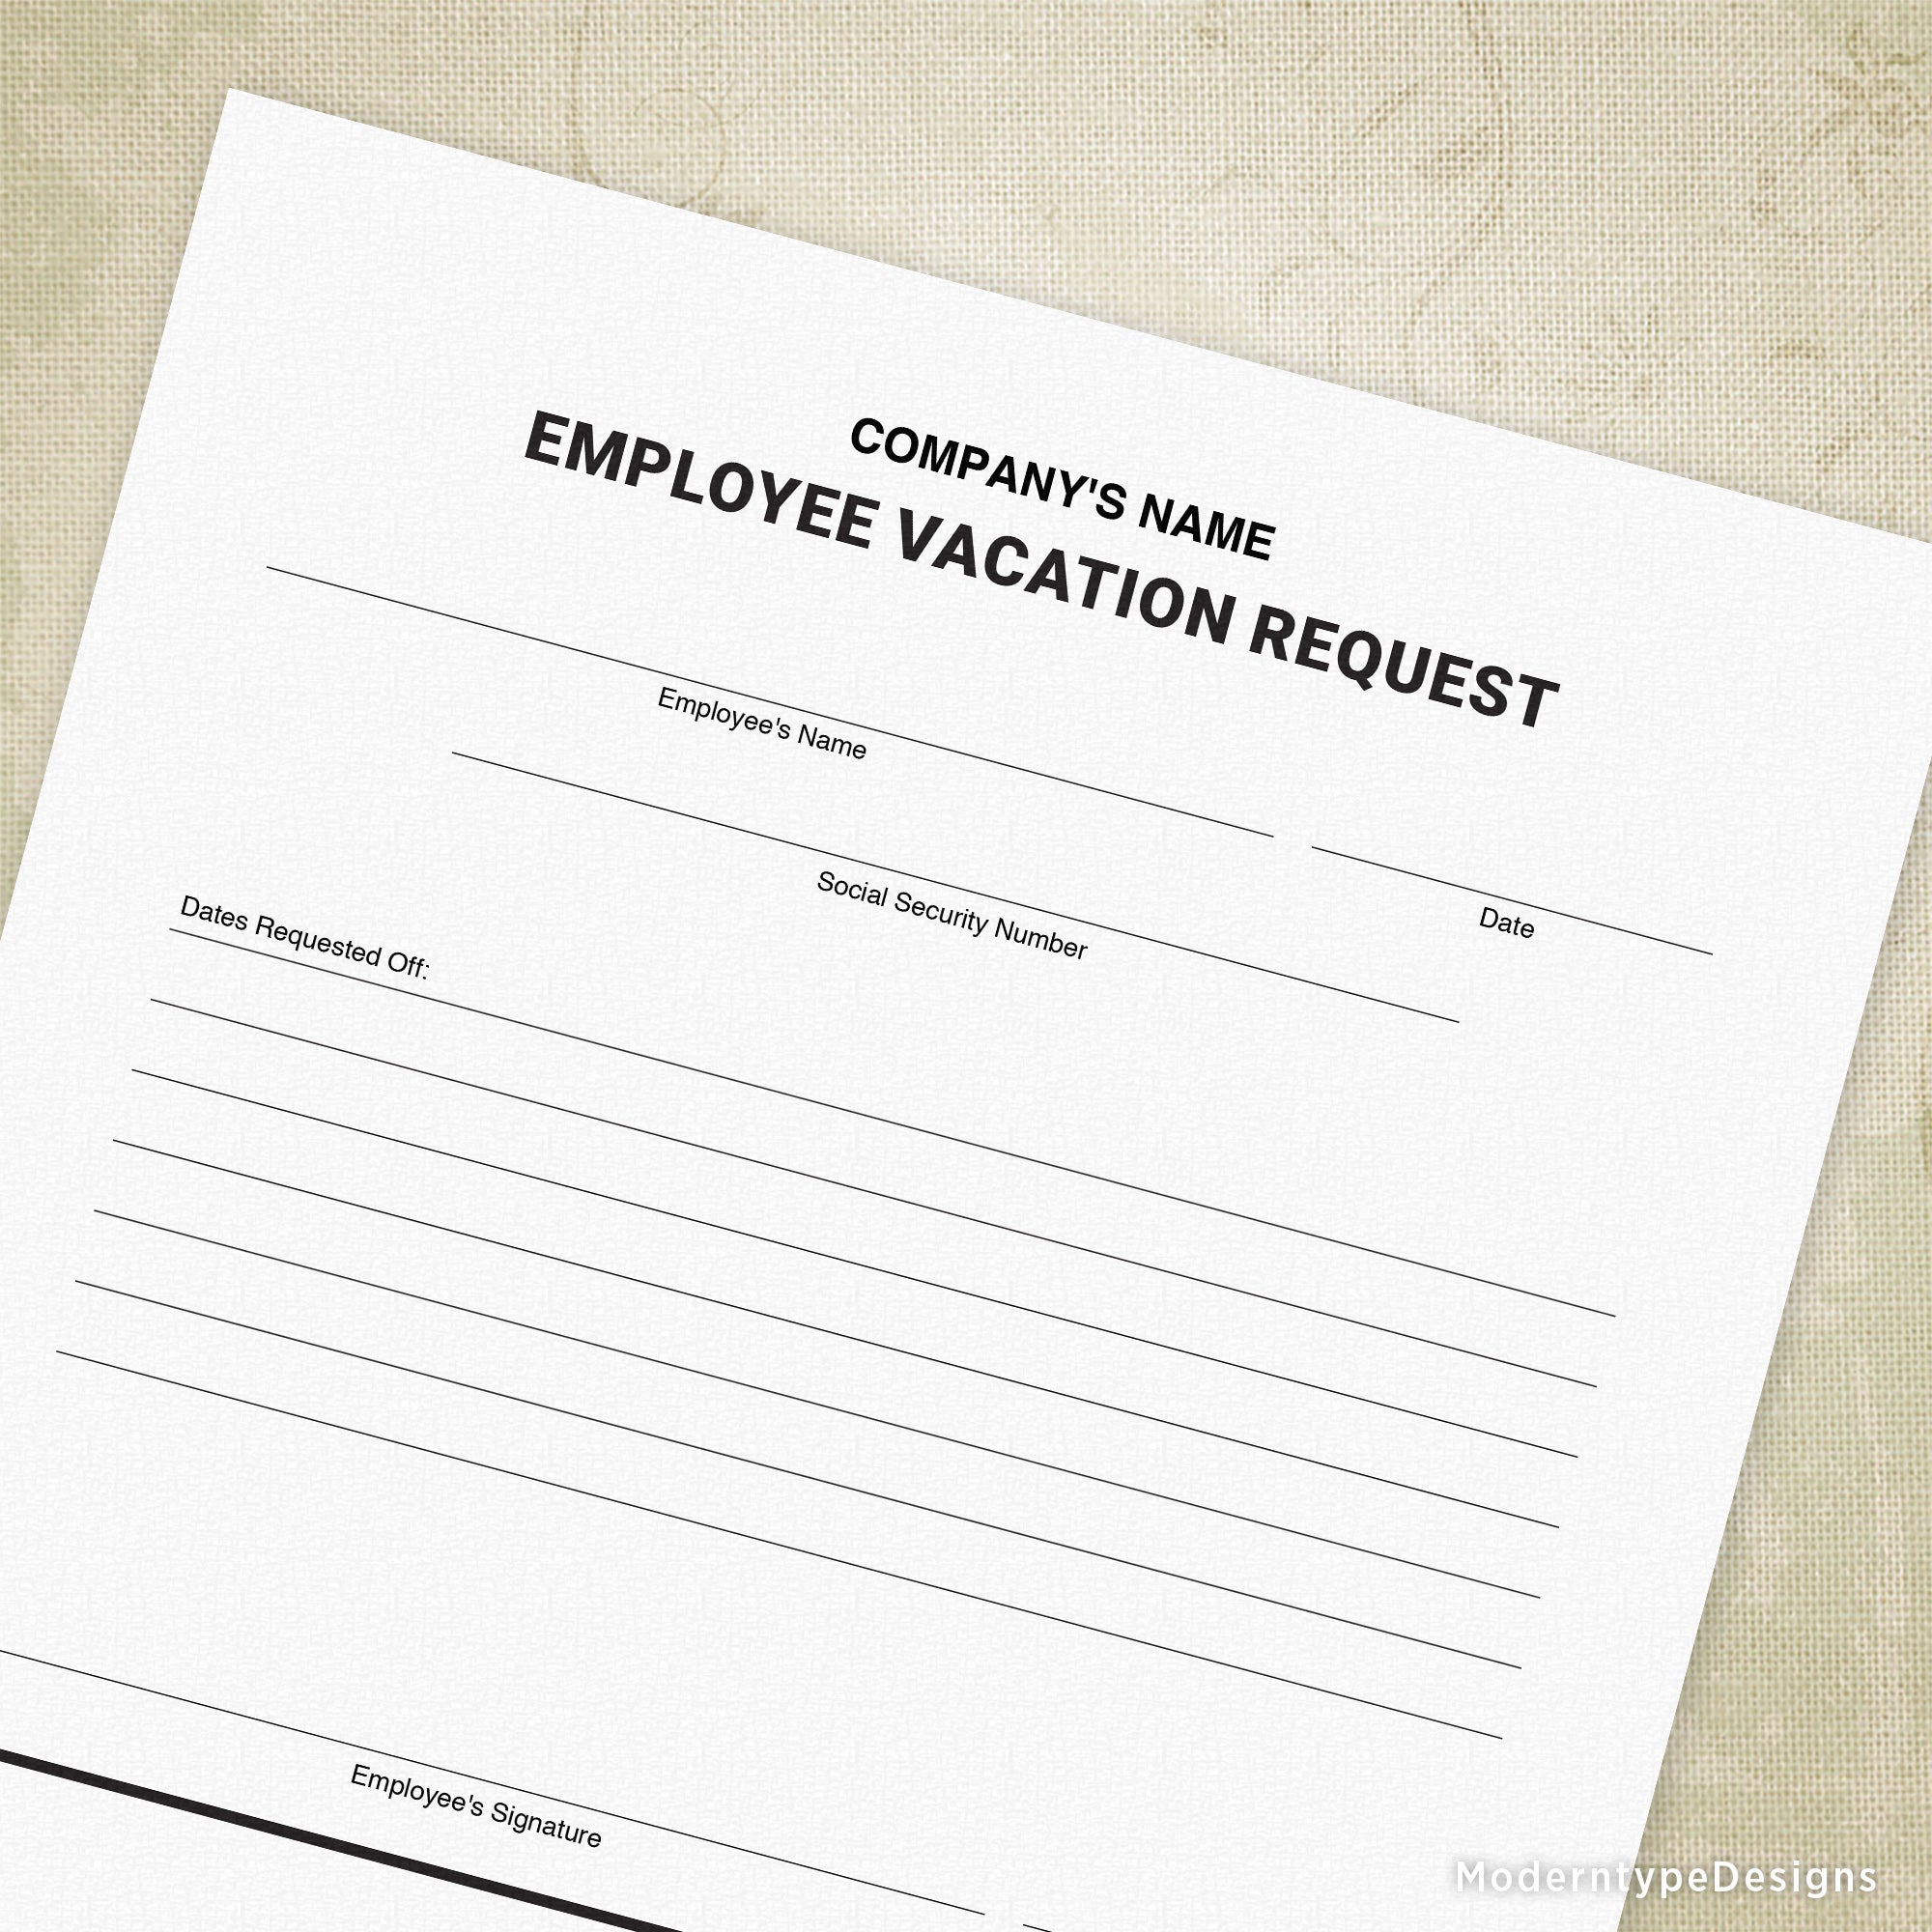 Employee Vacation Request Printable Form, Personalized